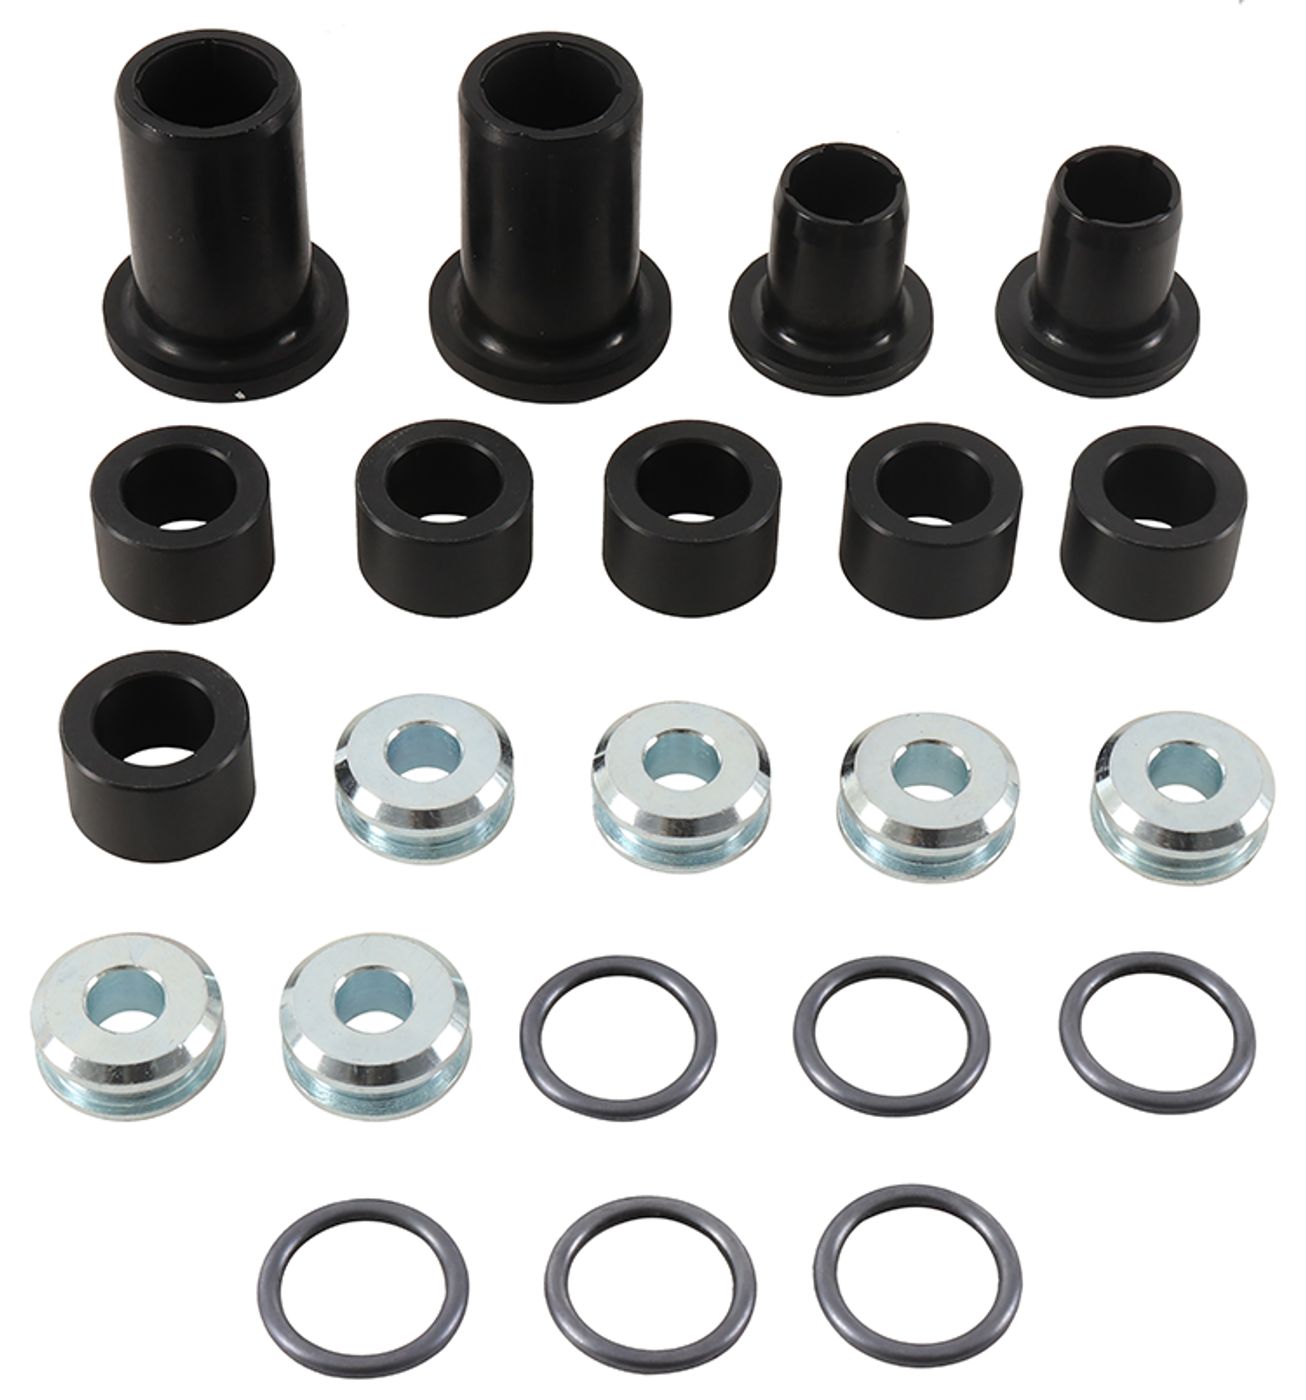 Wrp Rear Ind. Suspension Kits - WRP501205 image